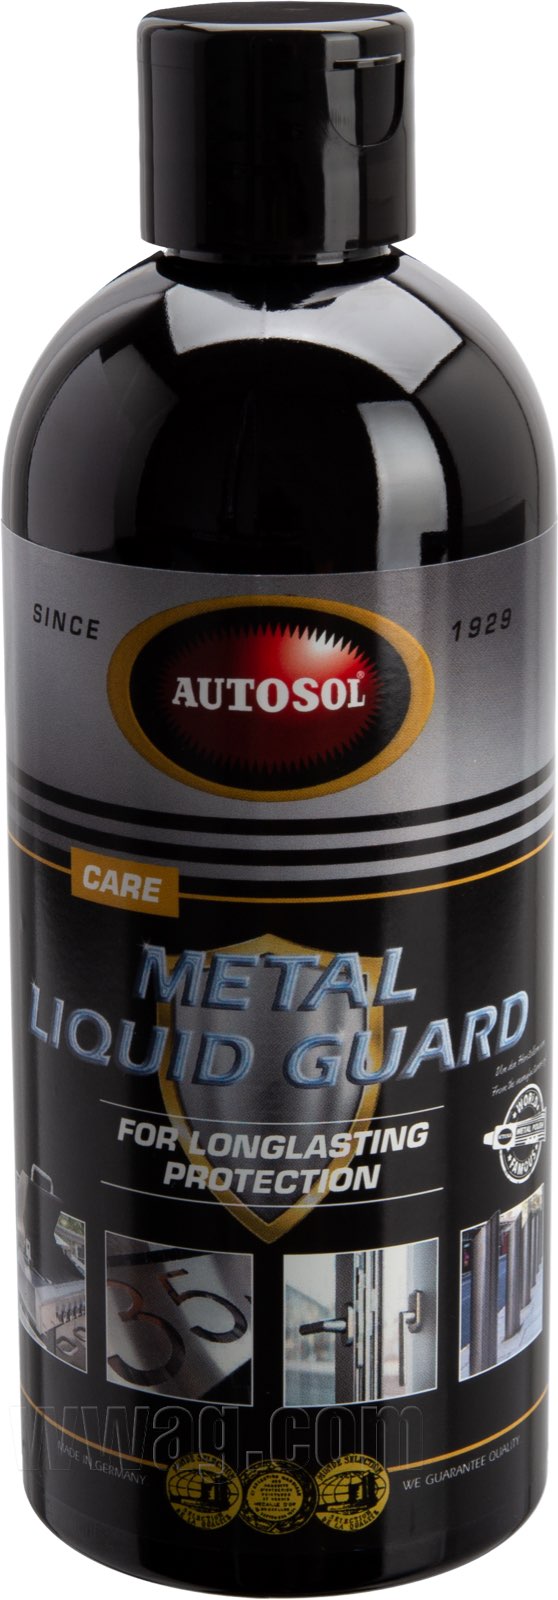 Sealing by Autosol